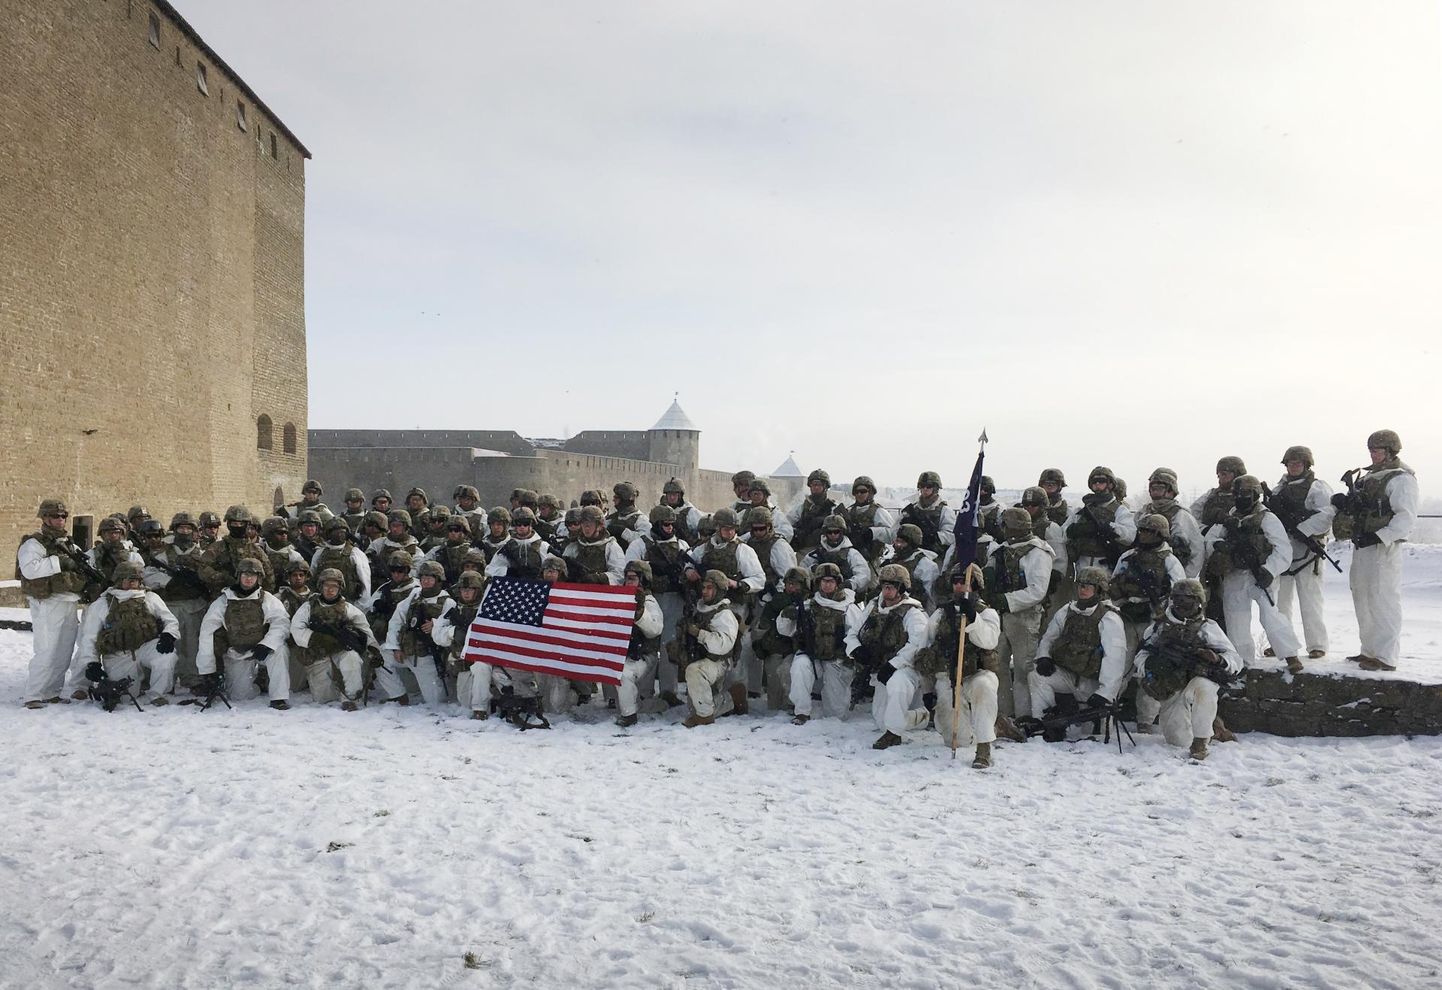 The additional allied unit arriving from the Americans is yet another example of Washington's commitment to ensuring the security of its allies. Although of a smaller caliber, but with the same idea, a tour de force was seen in February 2017, when US paratroopers organized a winter march in Ida-Virumaa. The trip ended with a group photo at the Narva fortress, near Russian border. This symbolic step was not without criticism from Moscow, so apparently new arrows are being shot at the new news on the other side of the Narva River.